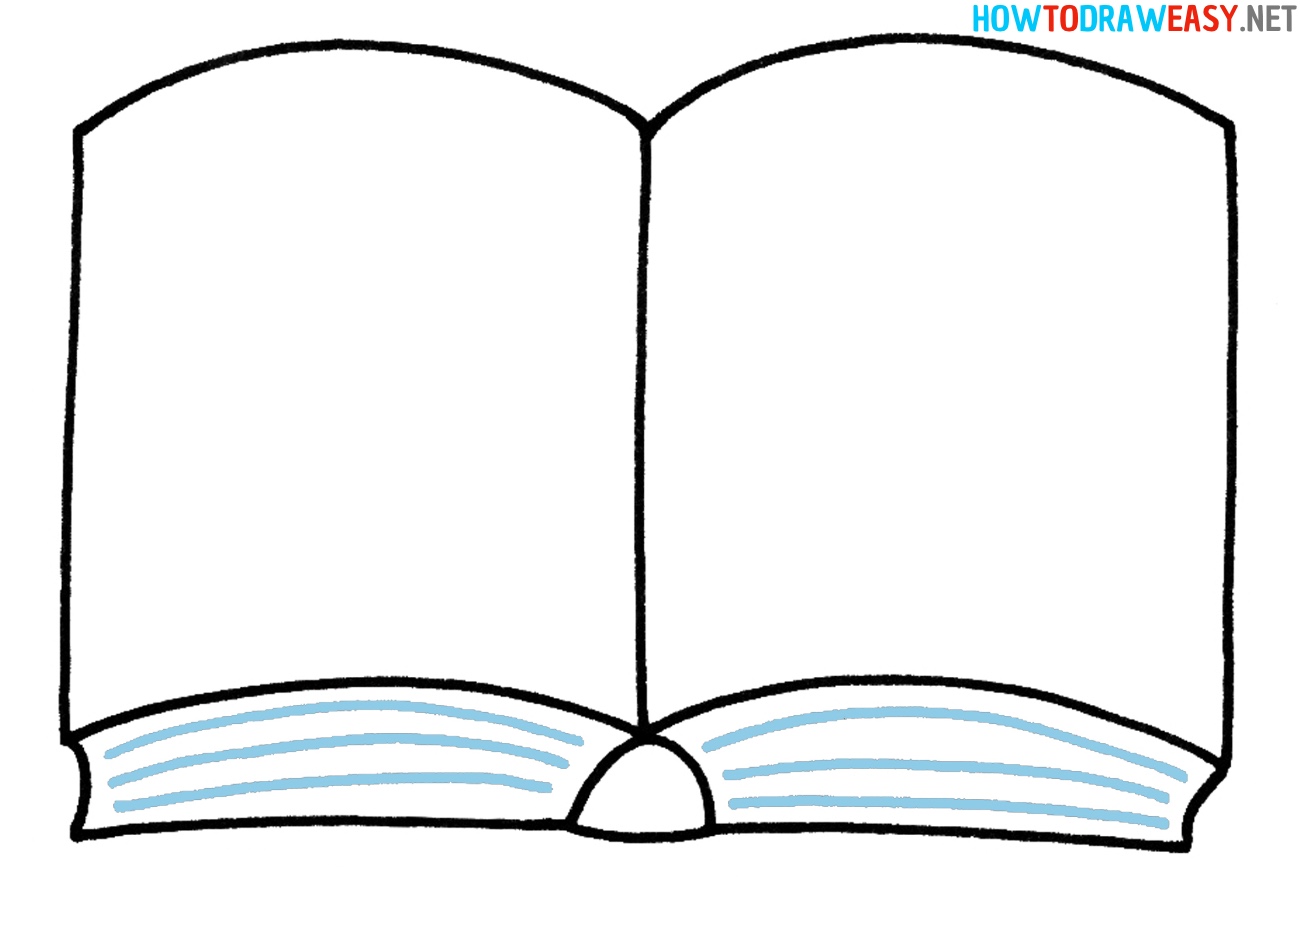 How to Draw an Easy Book